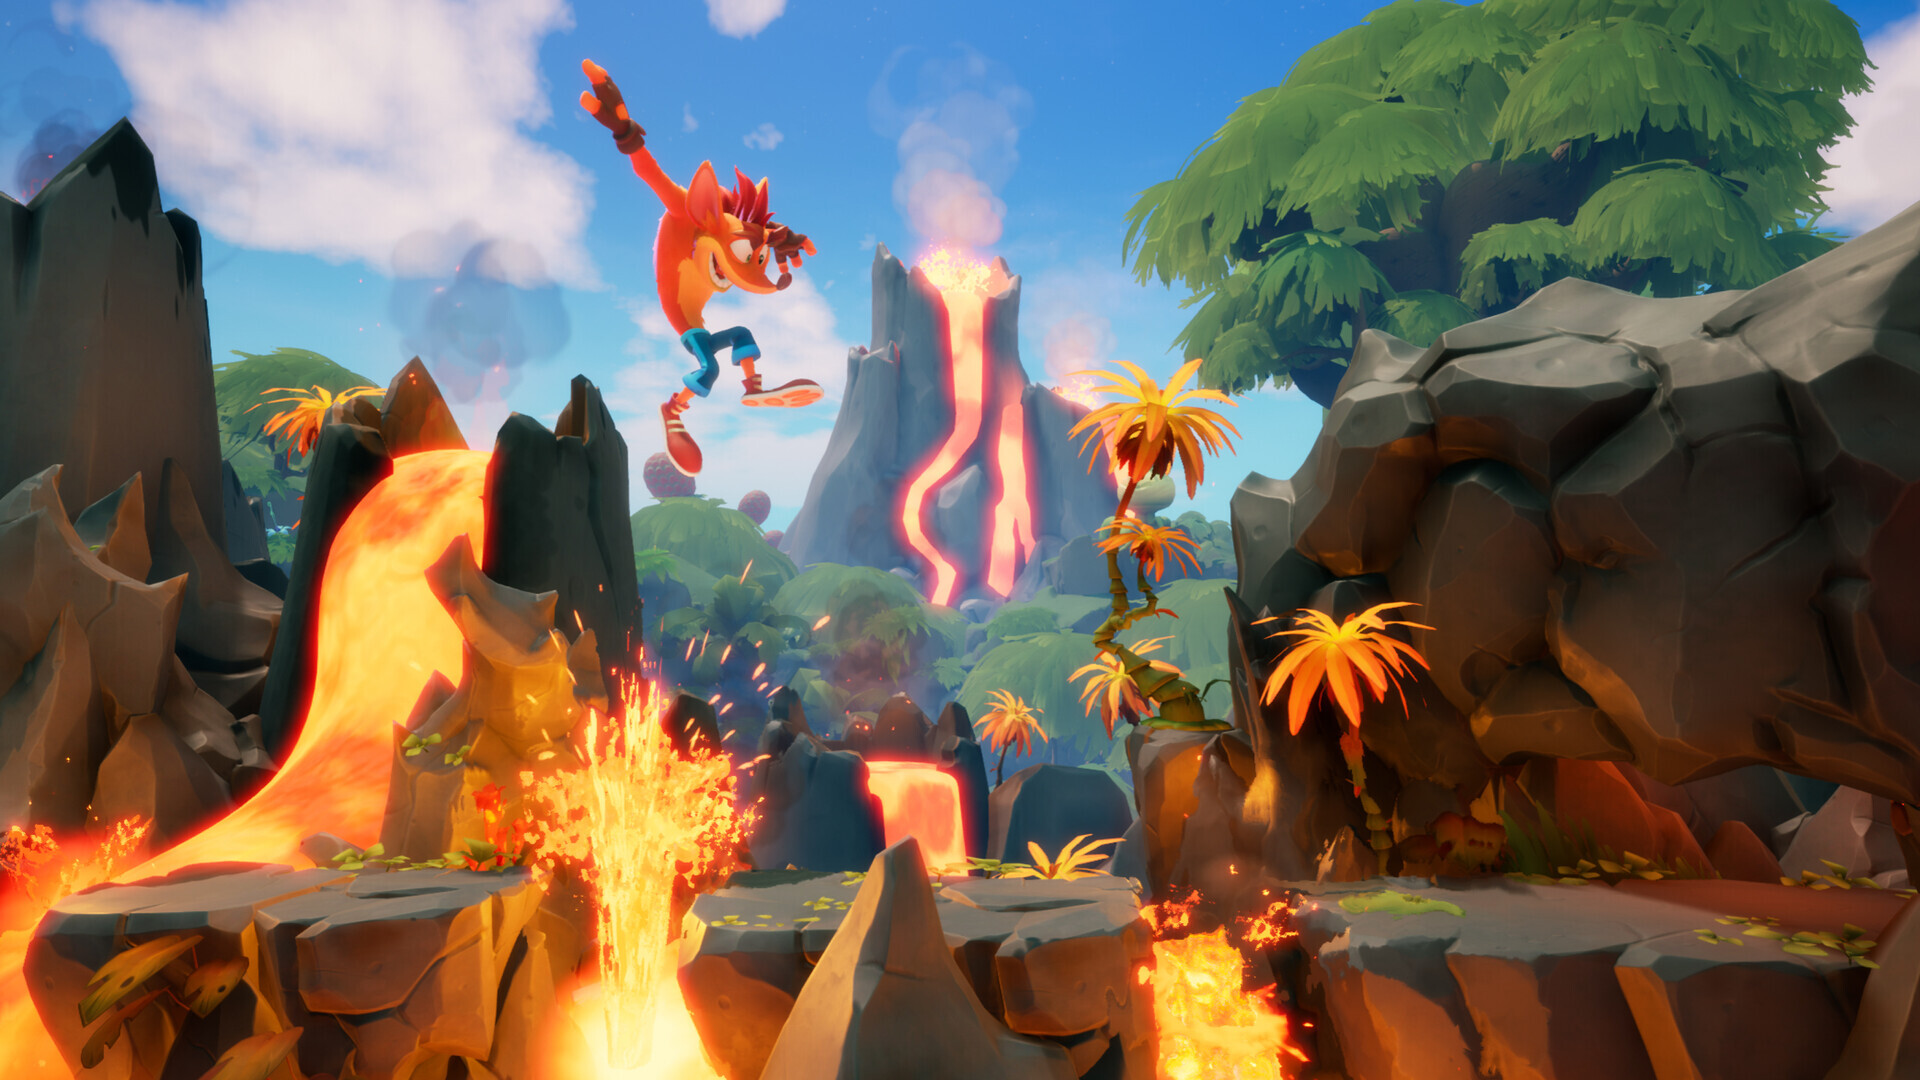 Crash Bandicoot 4 (PC) key for Steam - price from $18.33